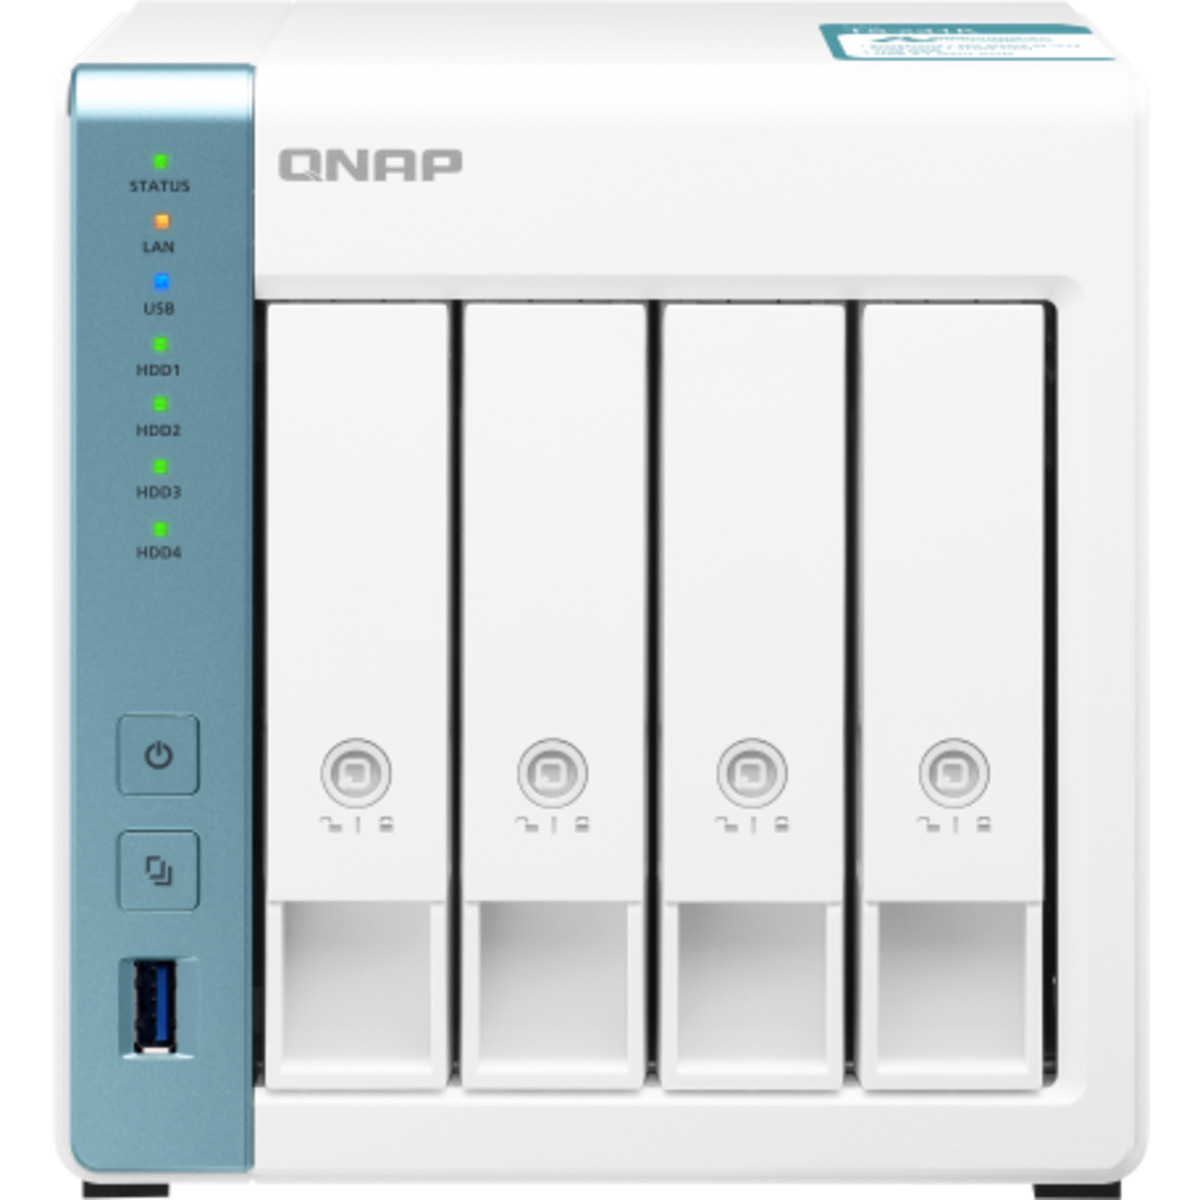 QNAP TS-431K 30tb 4-Bay Desktop Personal / Basic Home / Small Office NAS - Network Attached Storage Device 3x10tb Western Digital Gold WD102KRYZ 3.5 7200rpm SATA 6Gb/s HDD ENTERPRISE Class Drives Installed - Burn-In Tested TS-431K